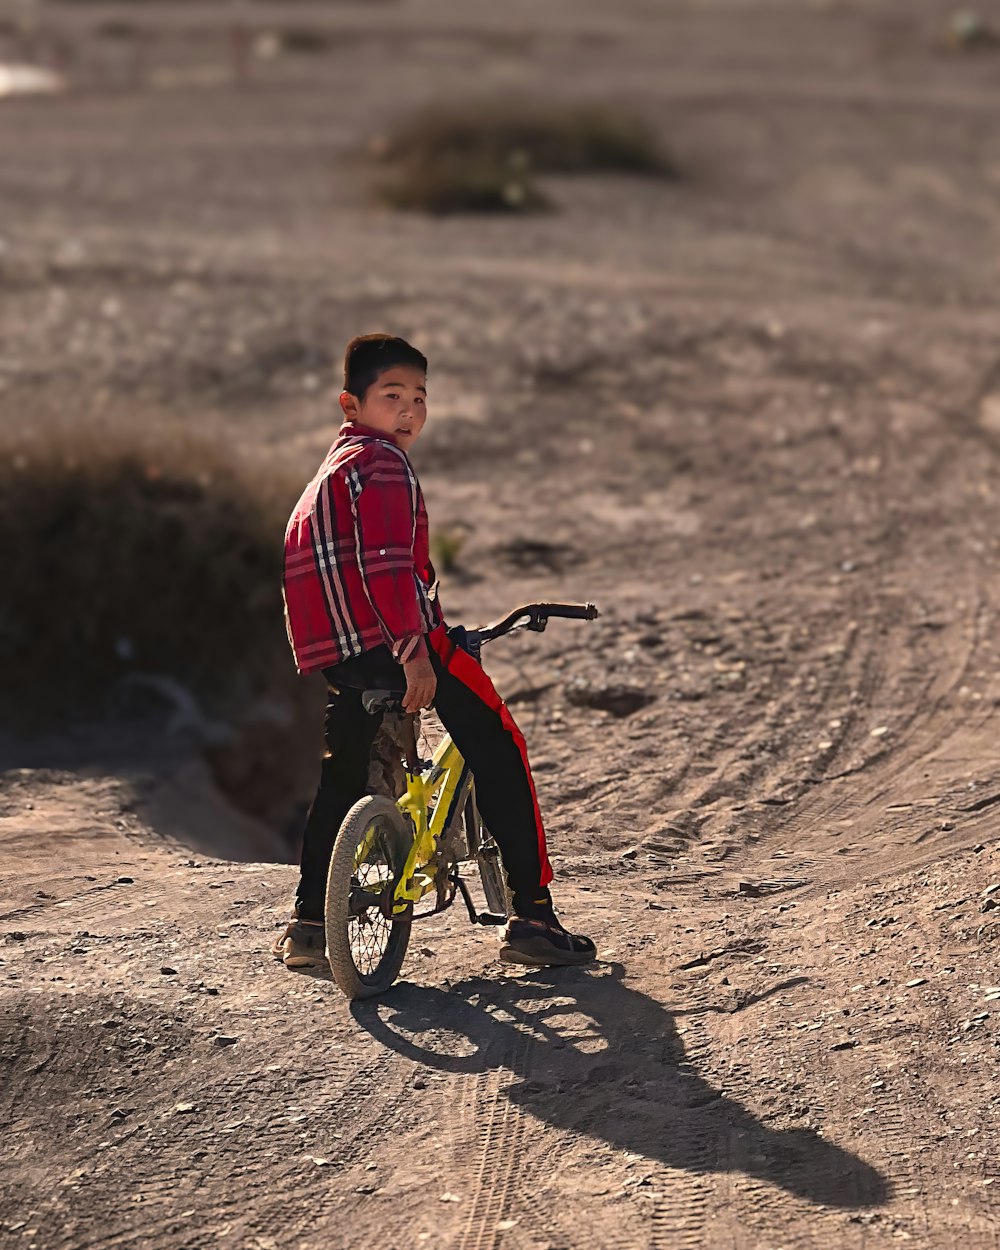 a young boy riding a bike on a dirt road